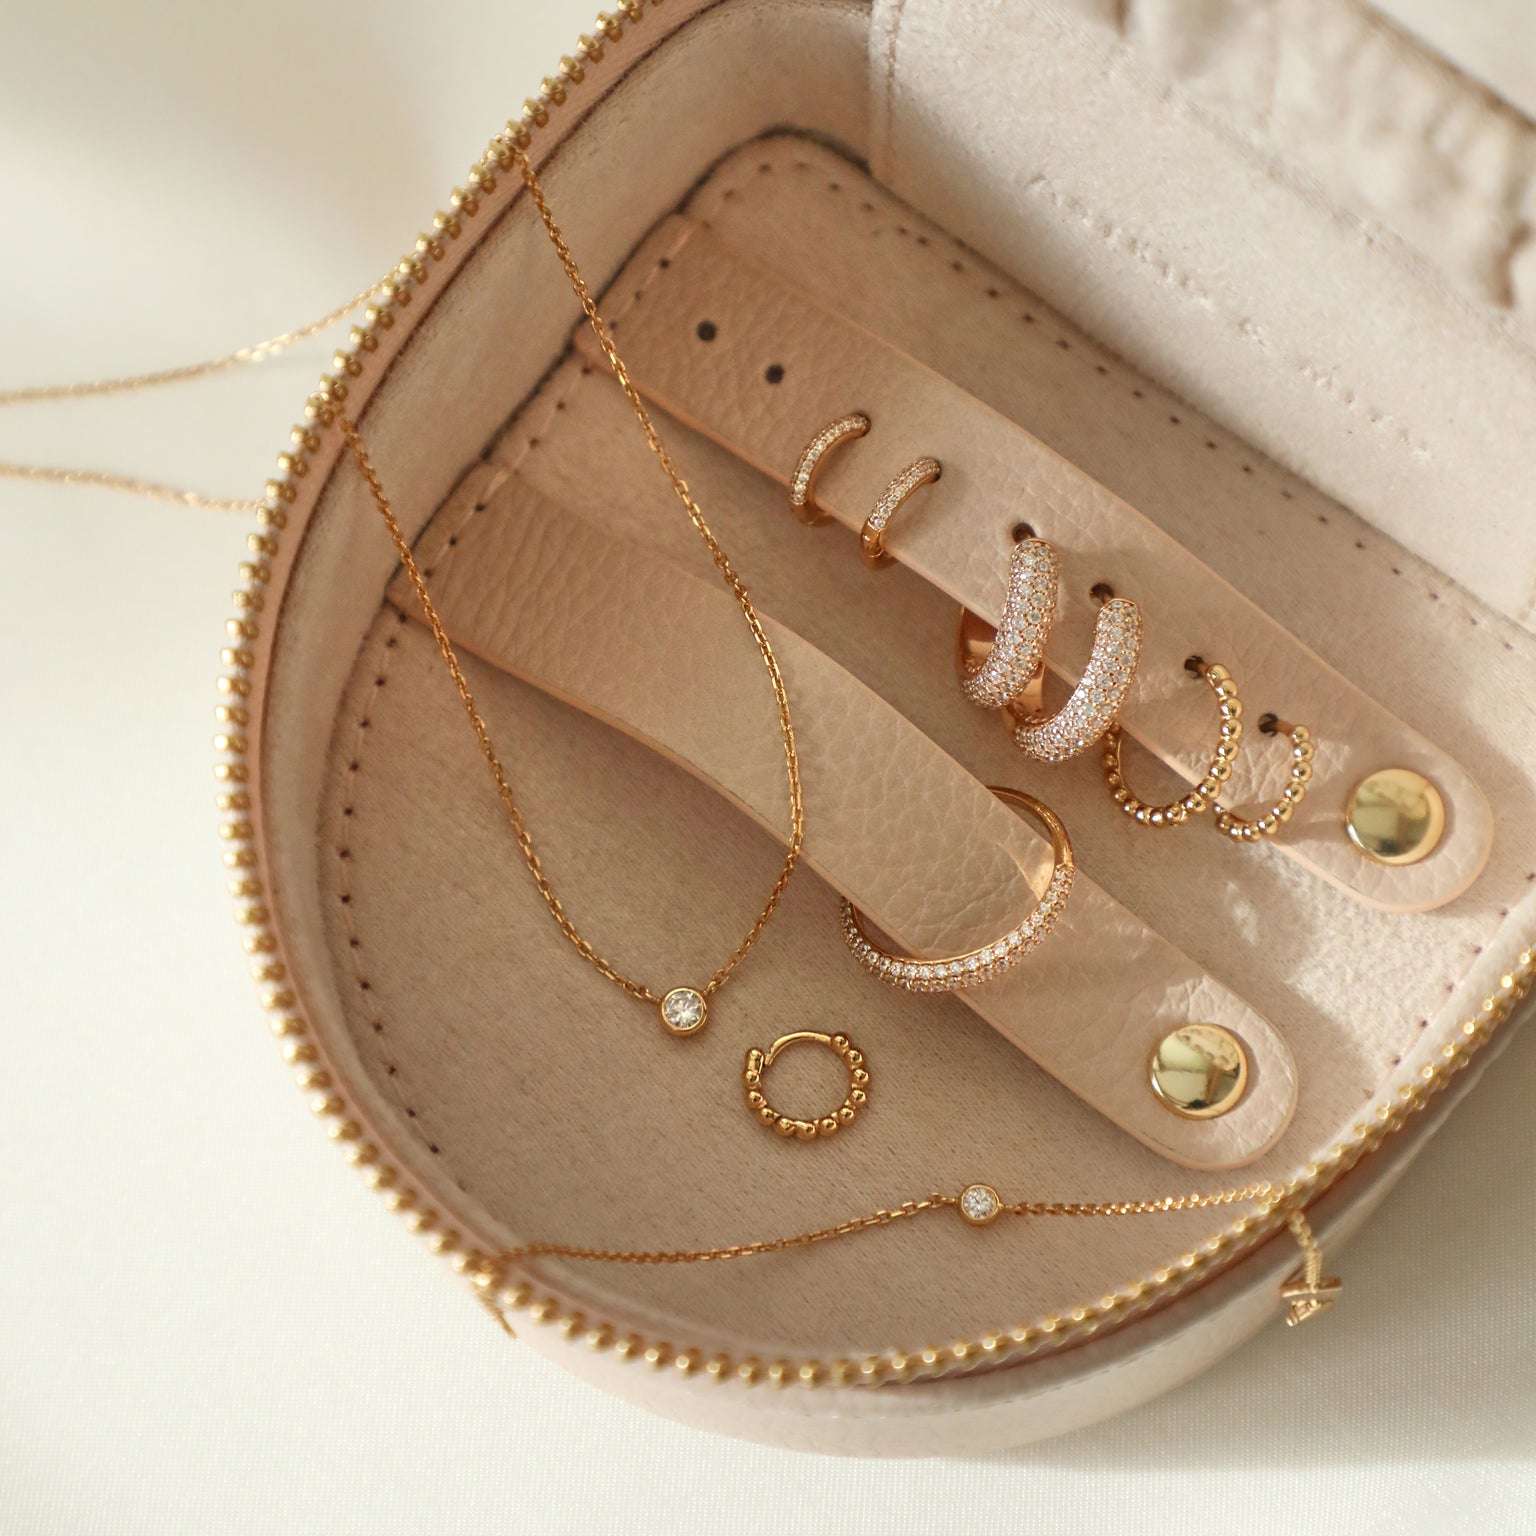 Leather Travel Jewellery Box in Fawn Sand